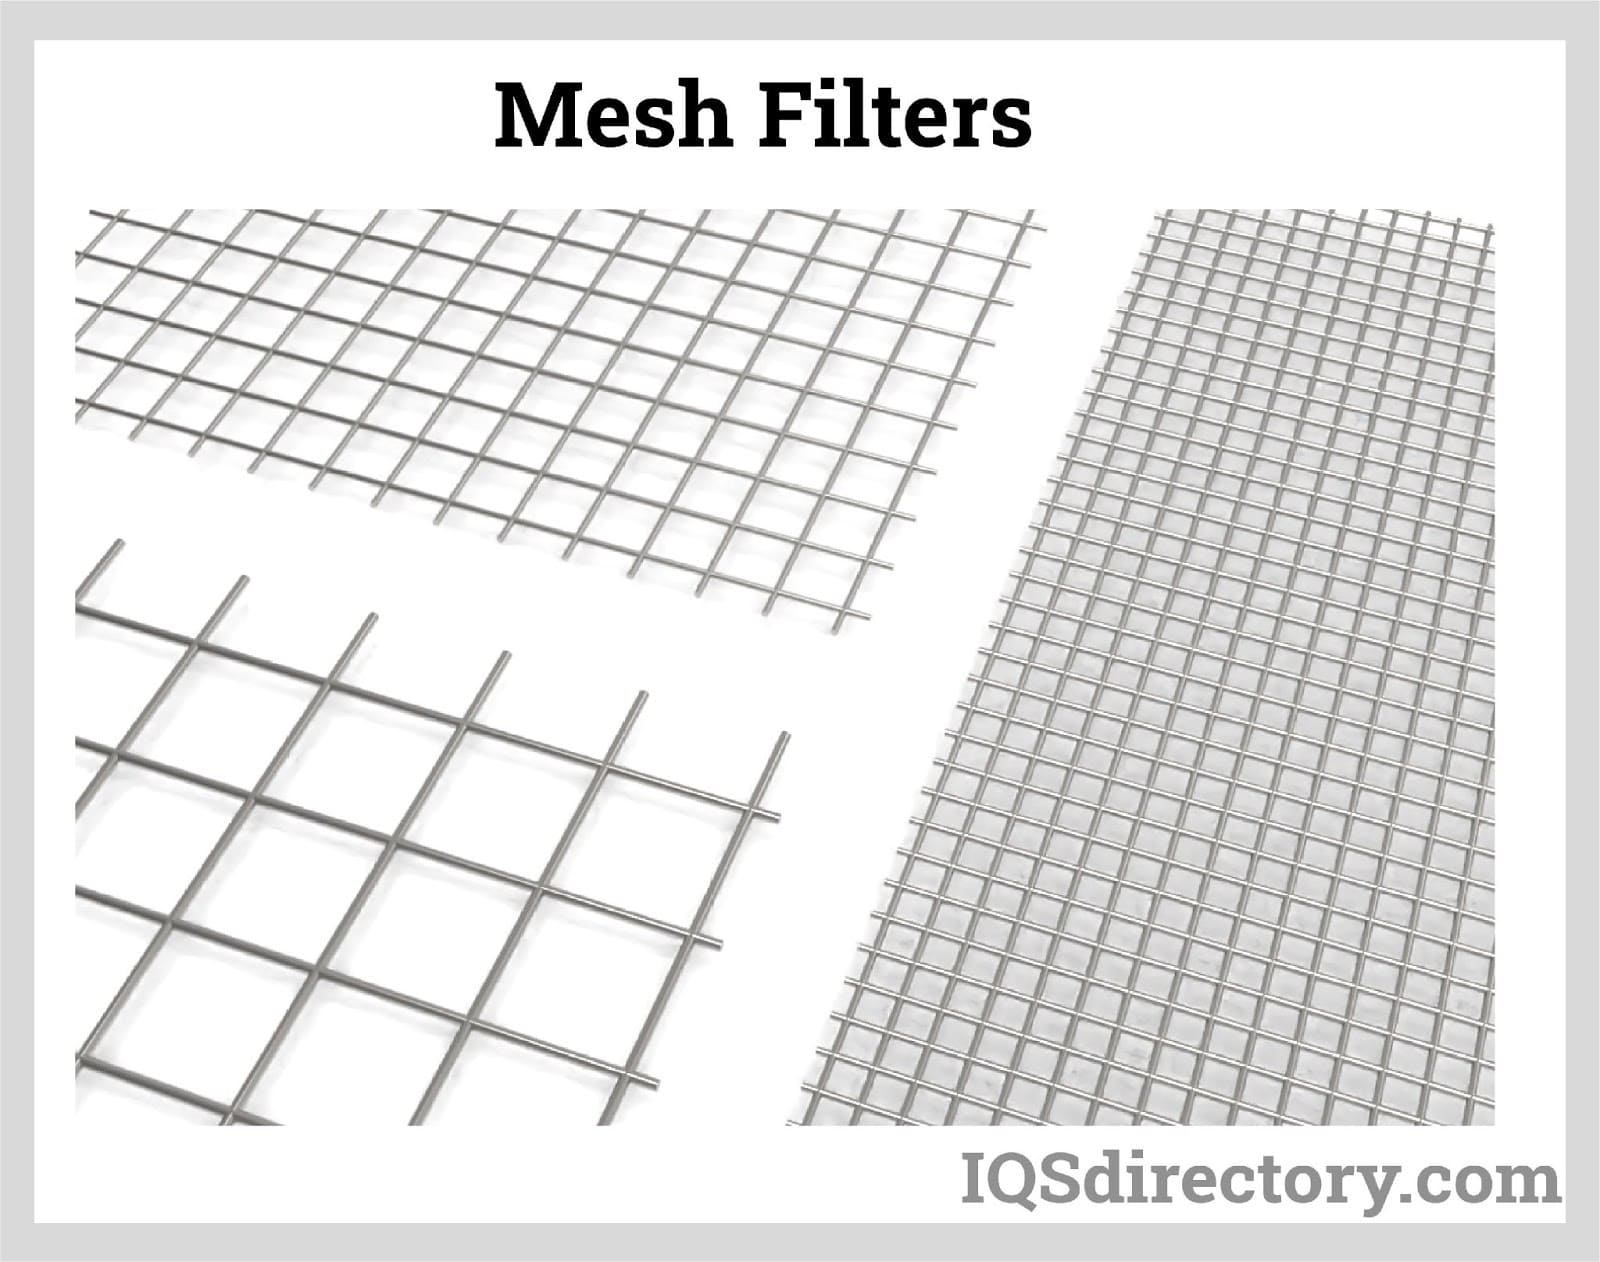 Anti Cutting Safety Protection Stainless Steel Wire Mesh Metal